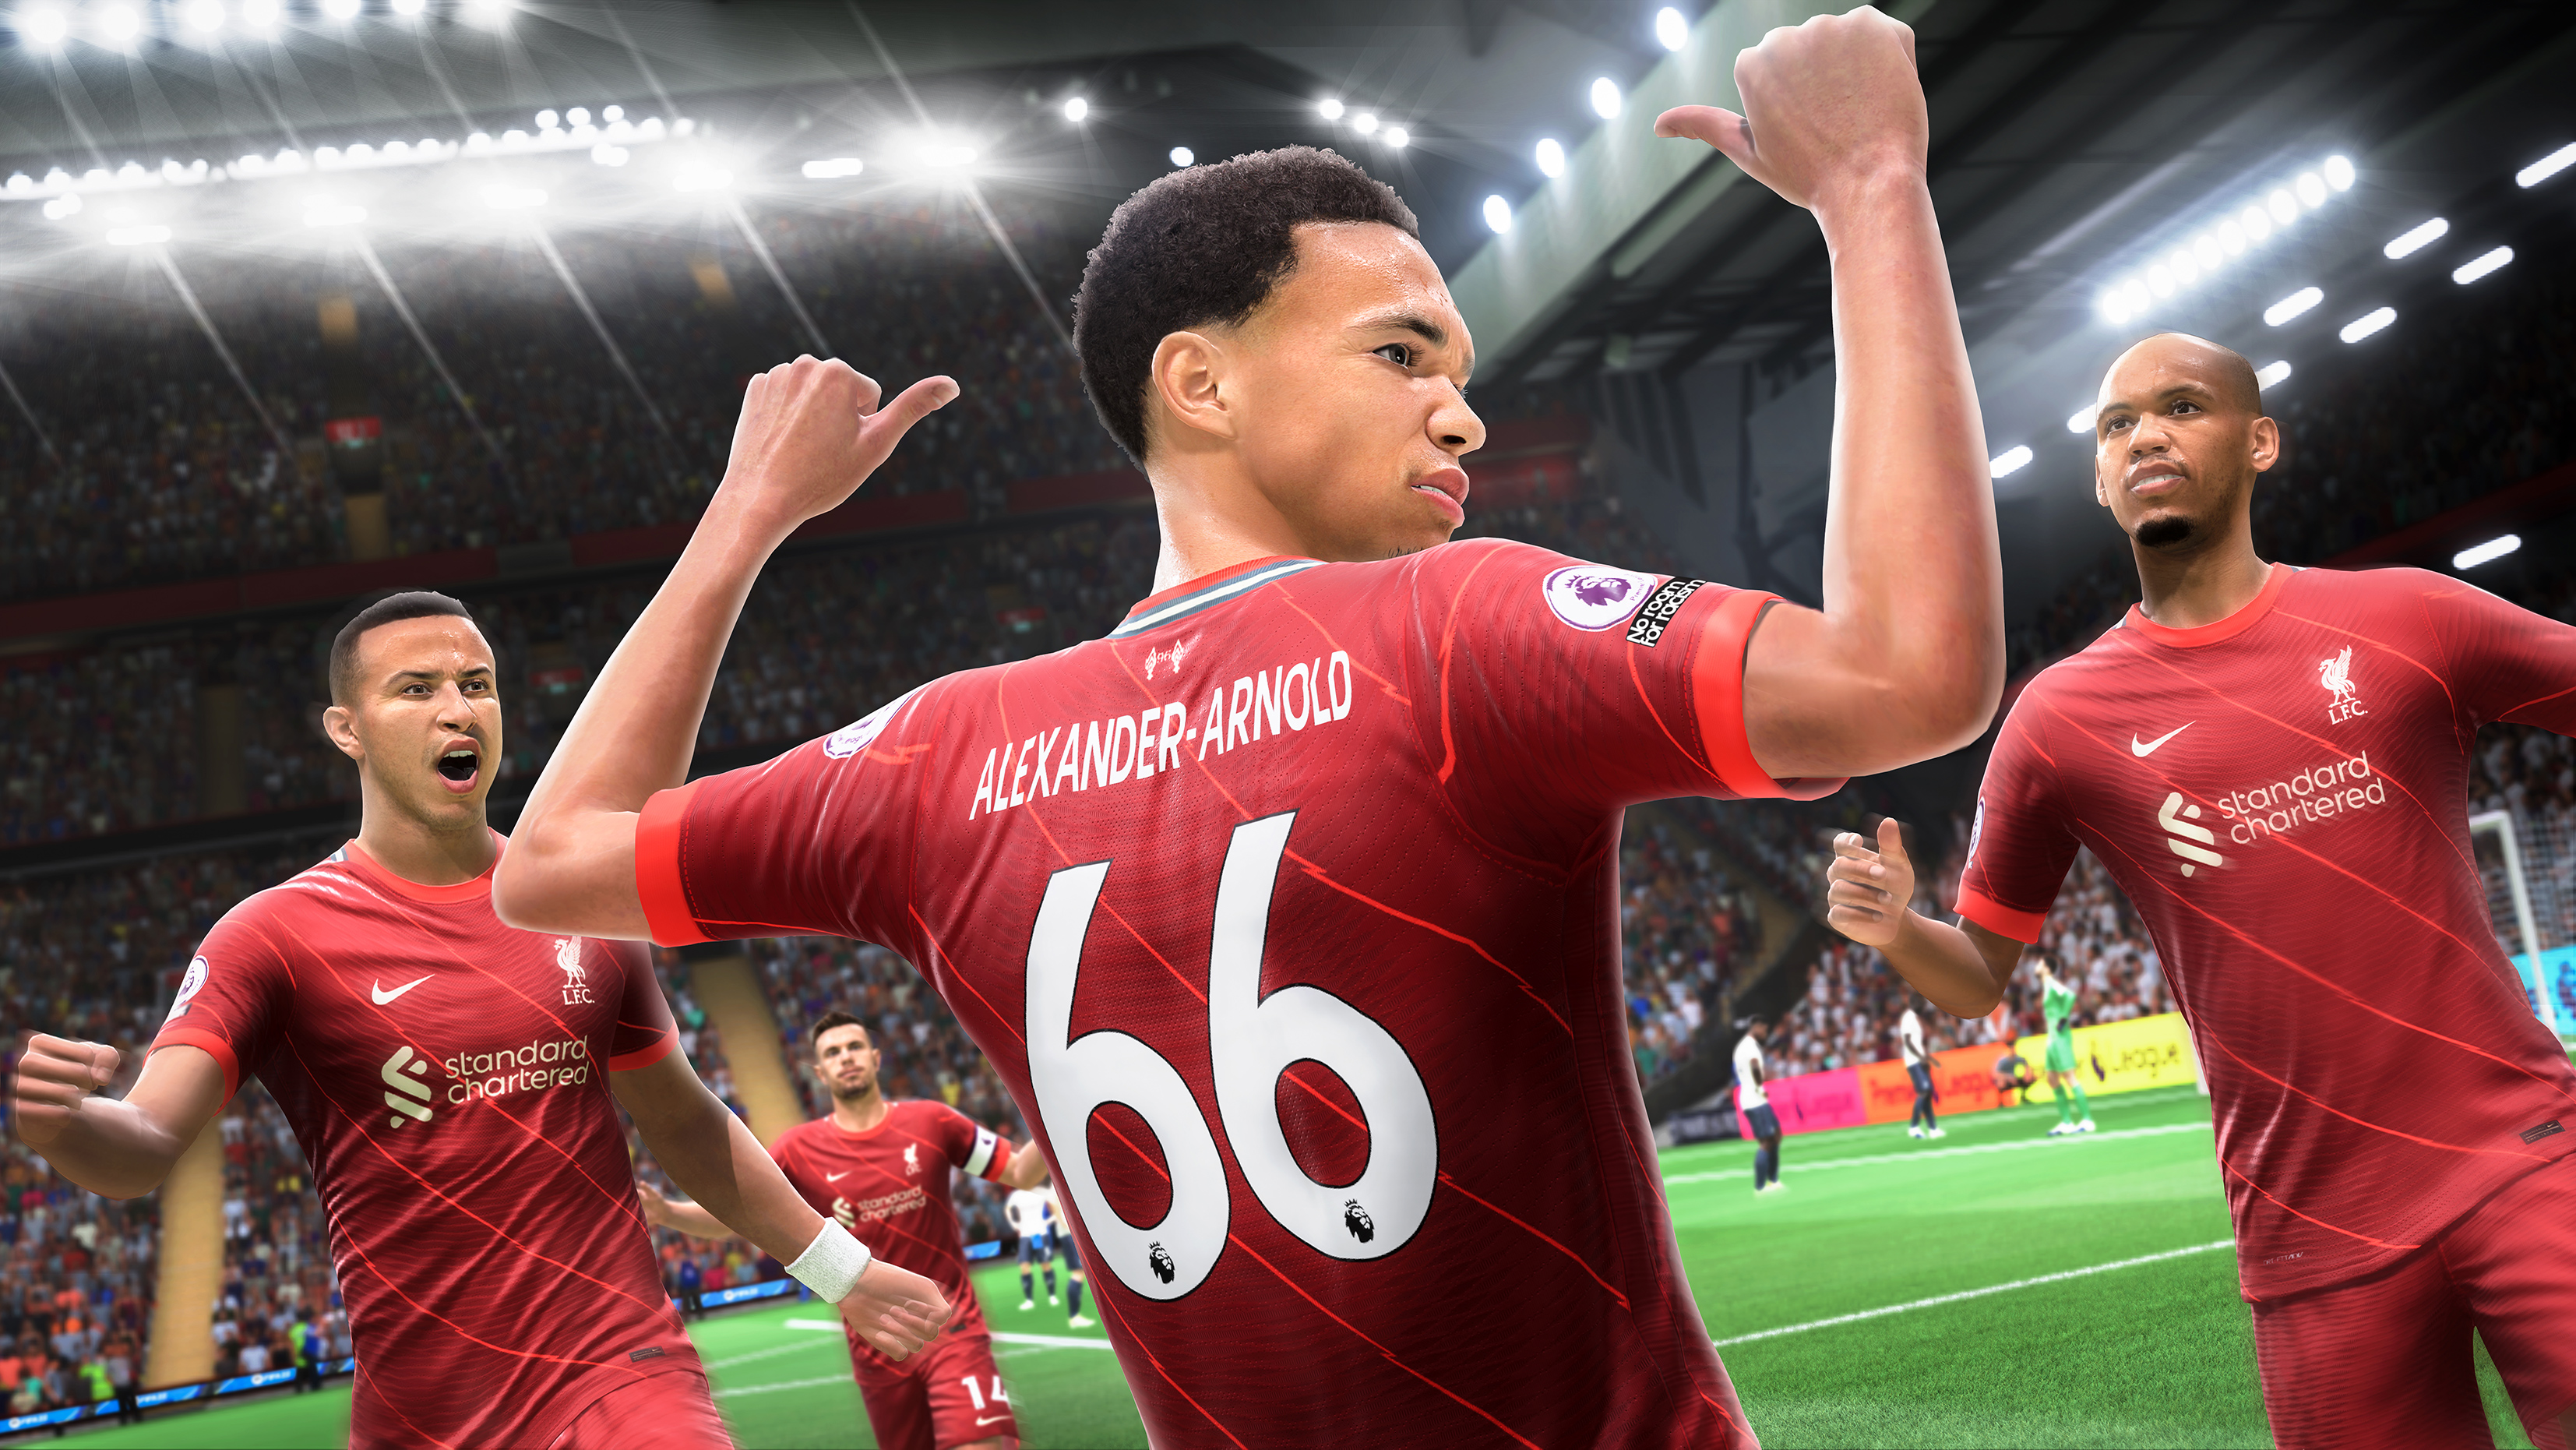 FIFA 22 screenshot showing Trent Alexander-Arnold celebrating a goal with team mates